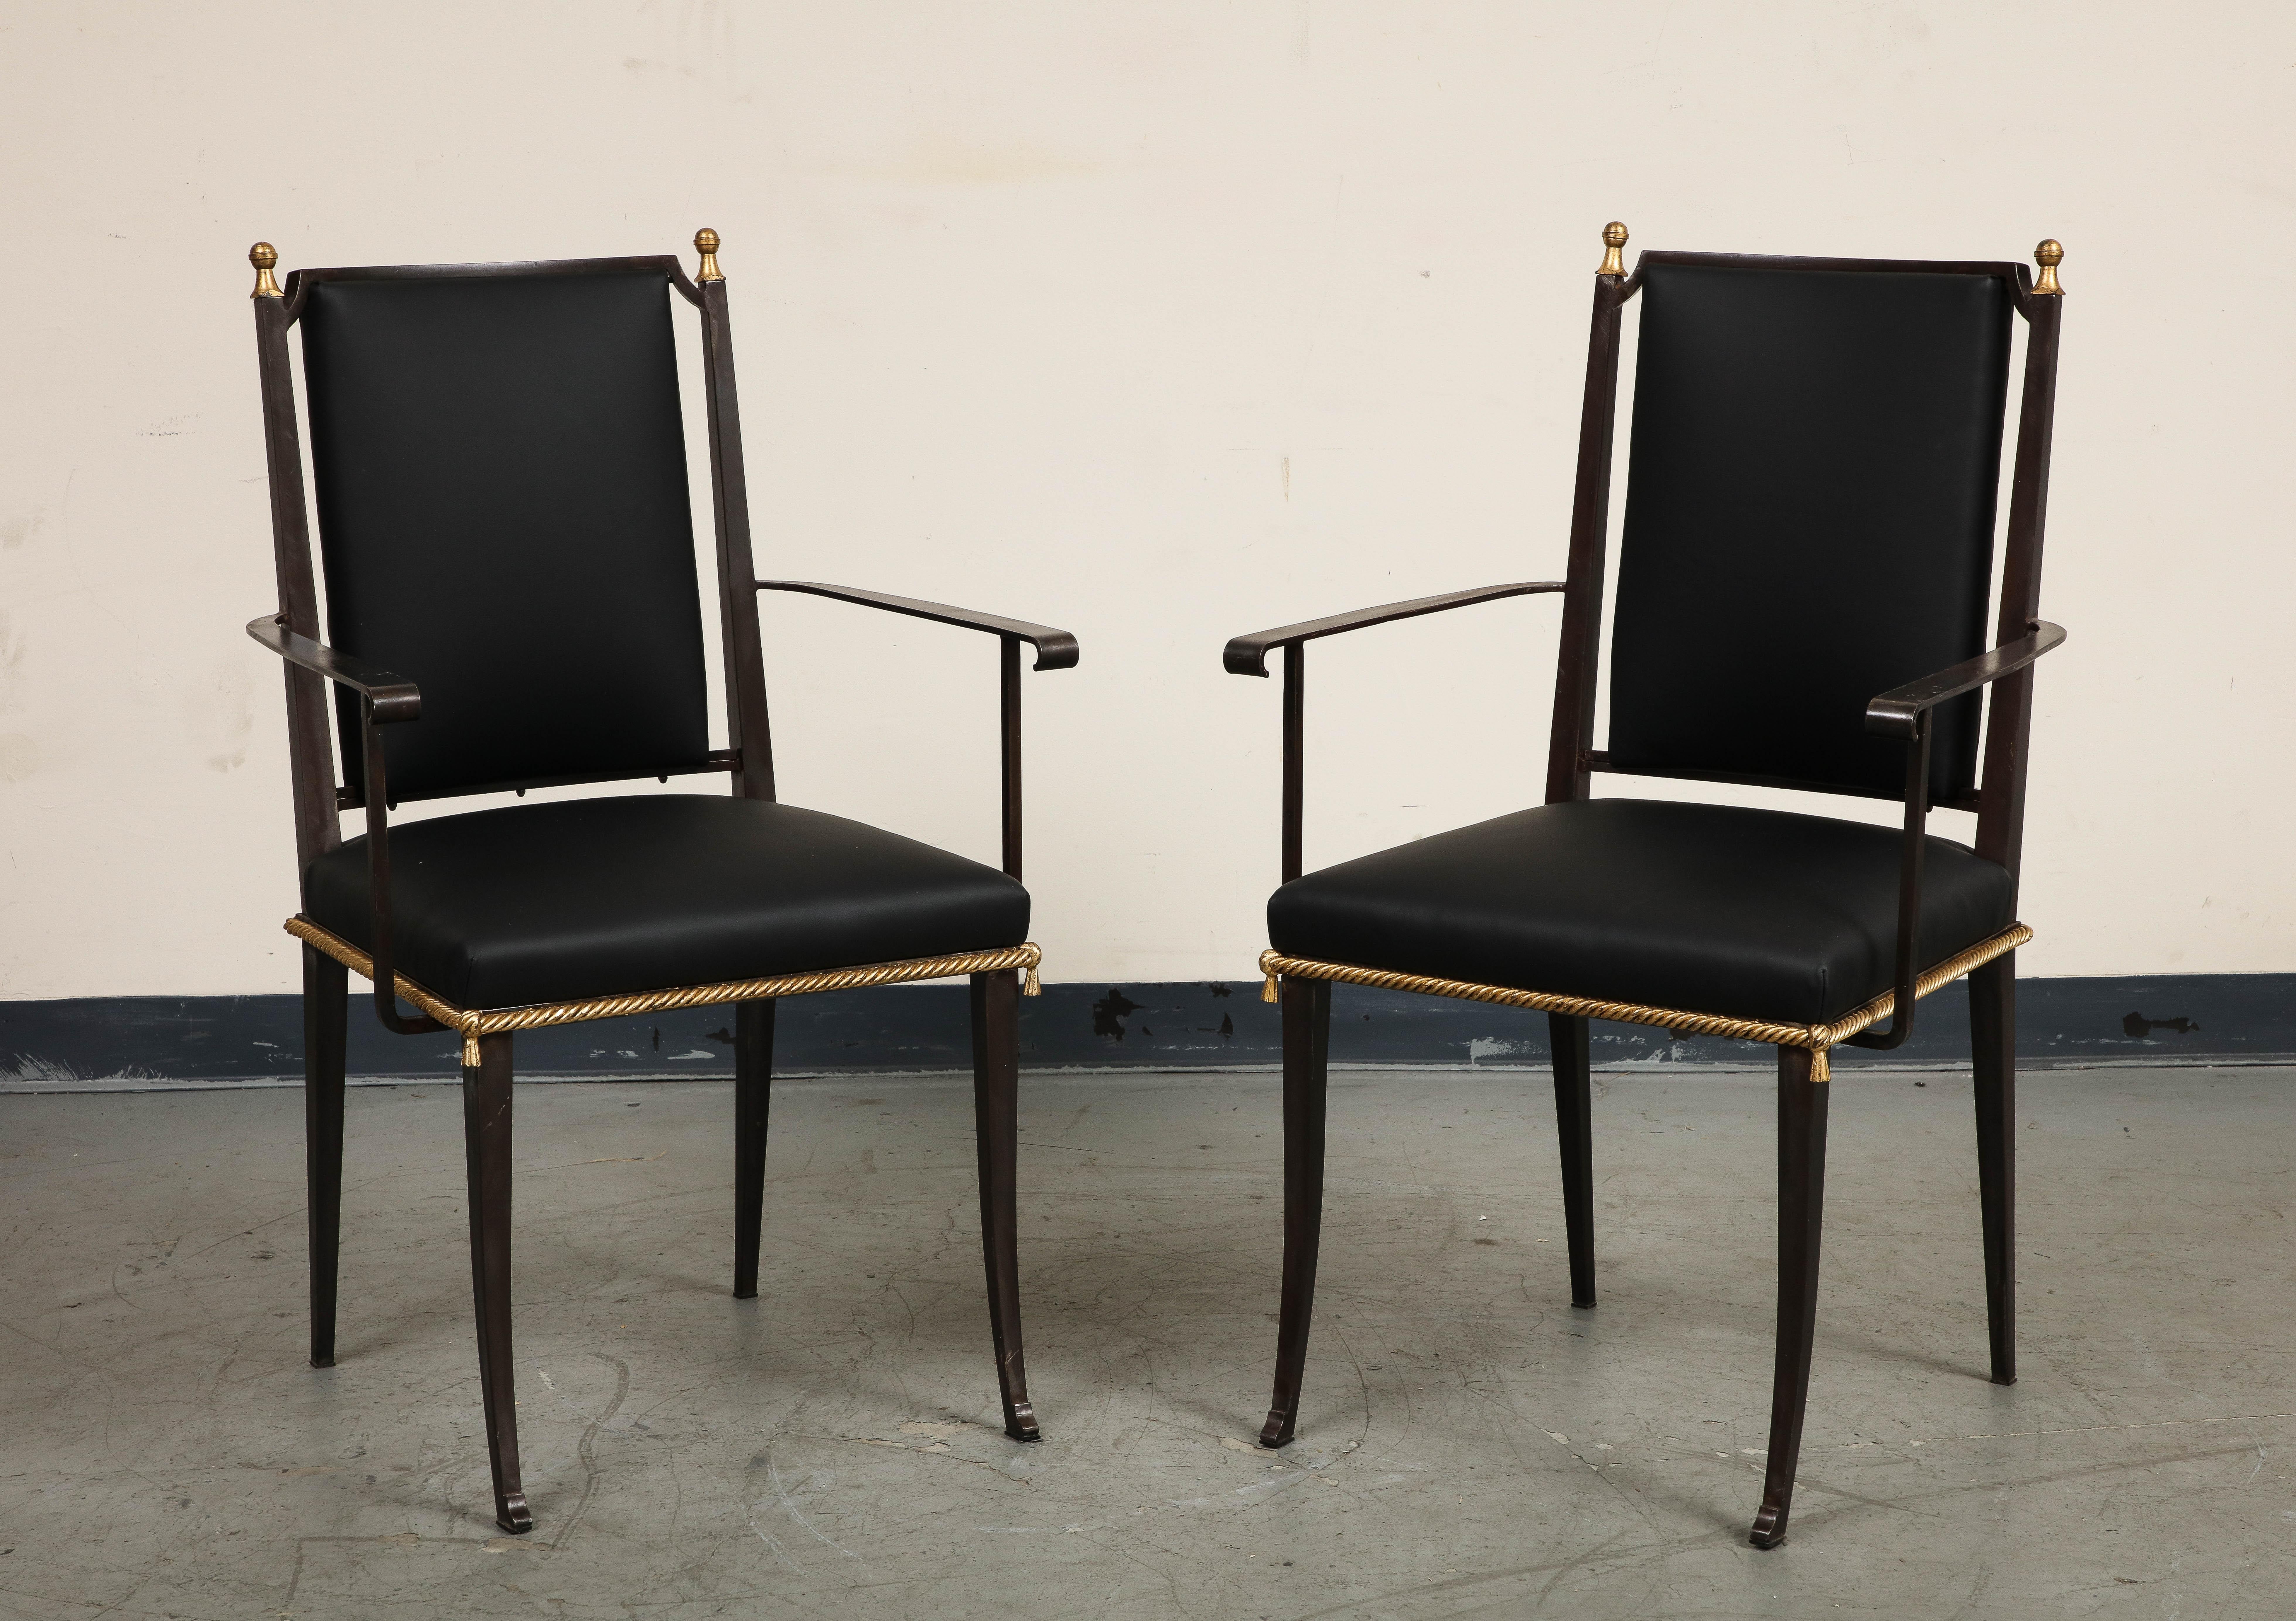 20th Century French Midcentury Blackened Iron Dining Chairs, Set of 7 For Sale